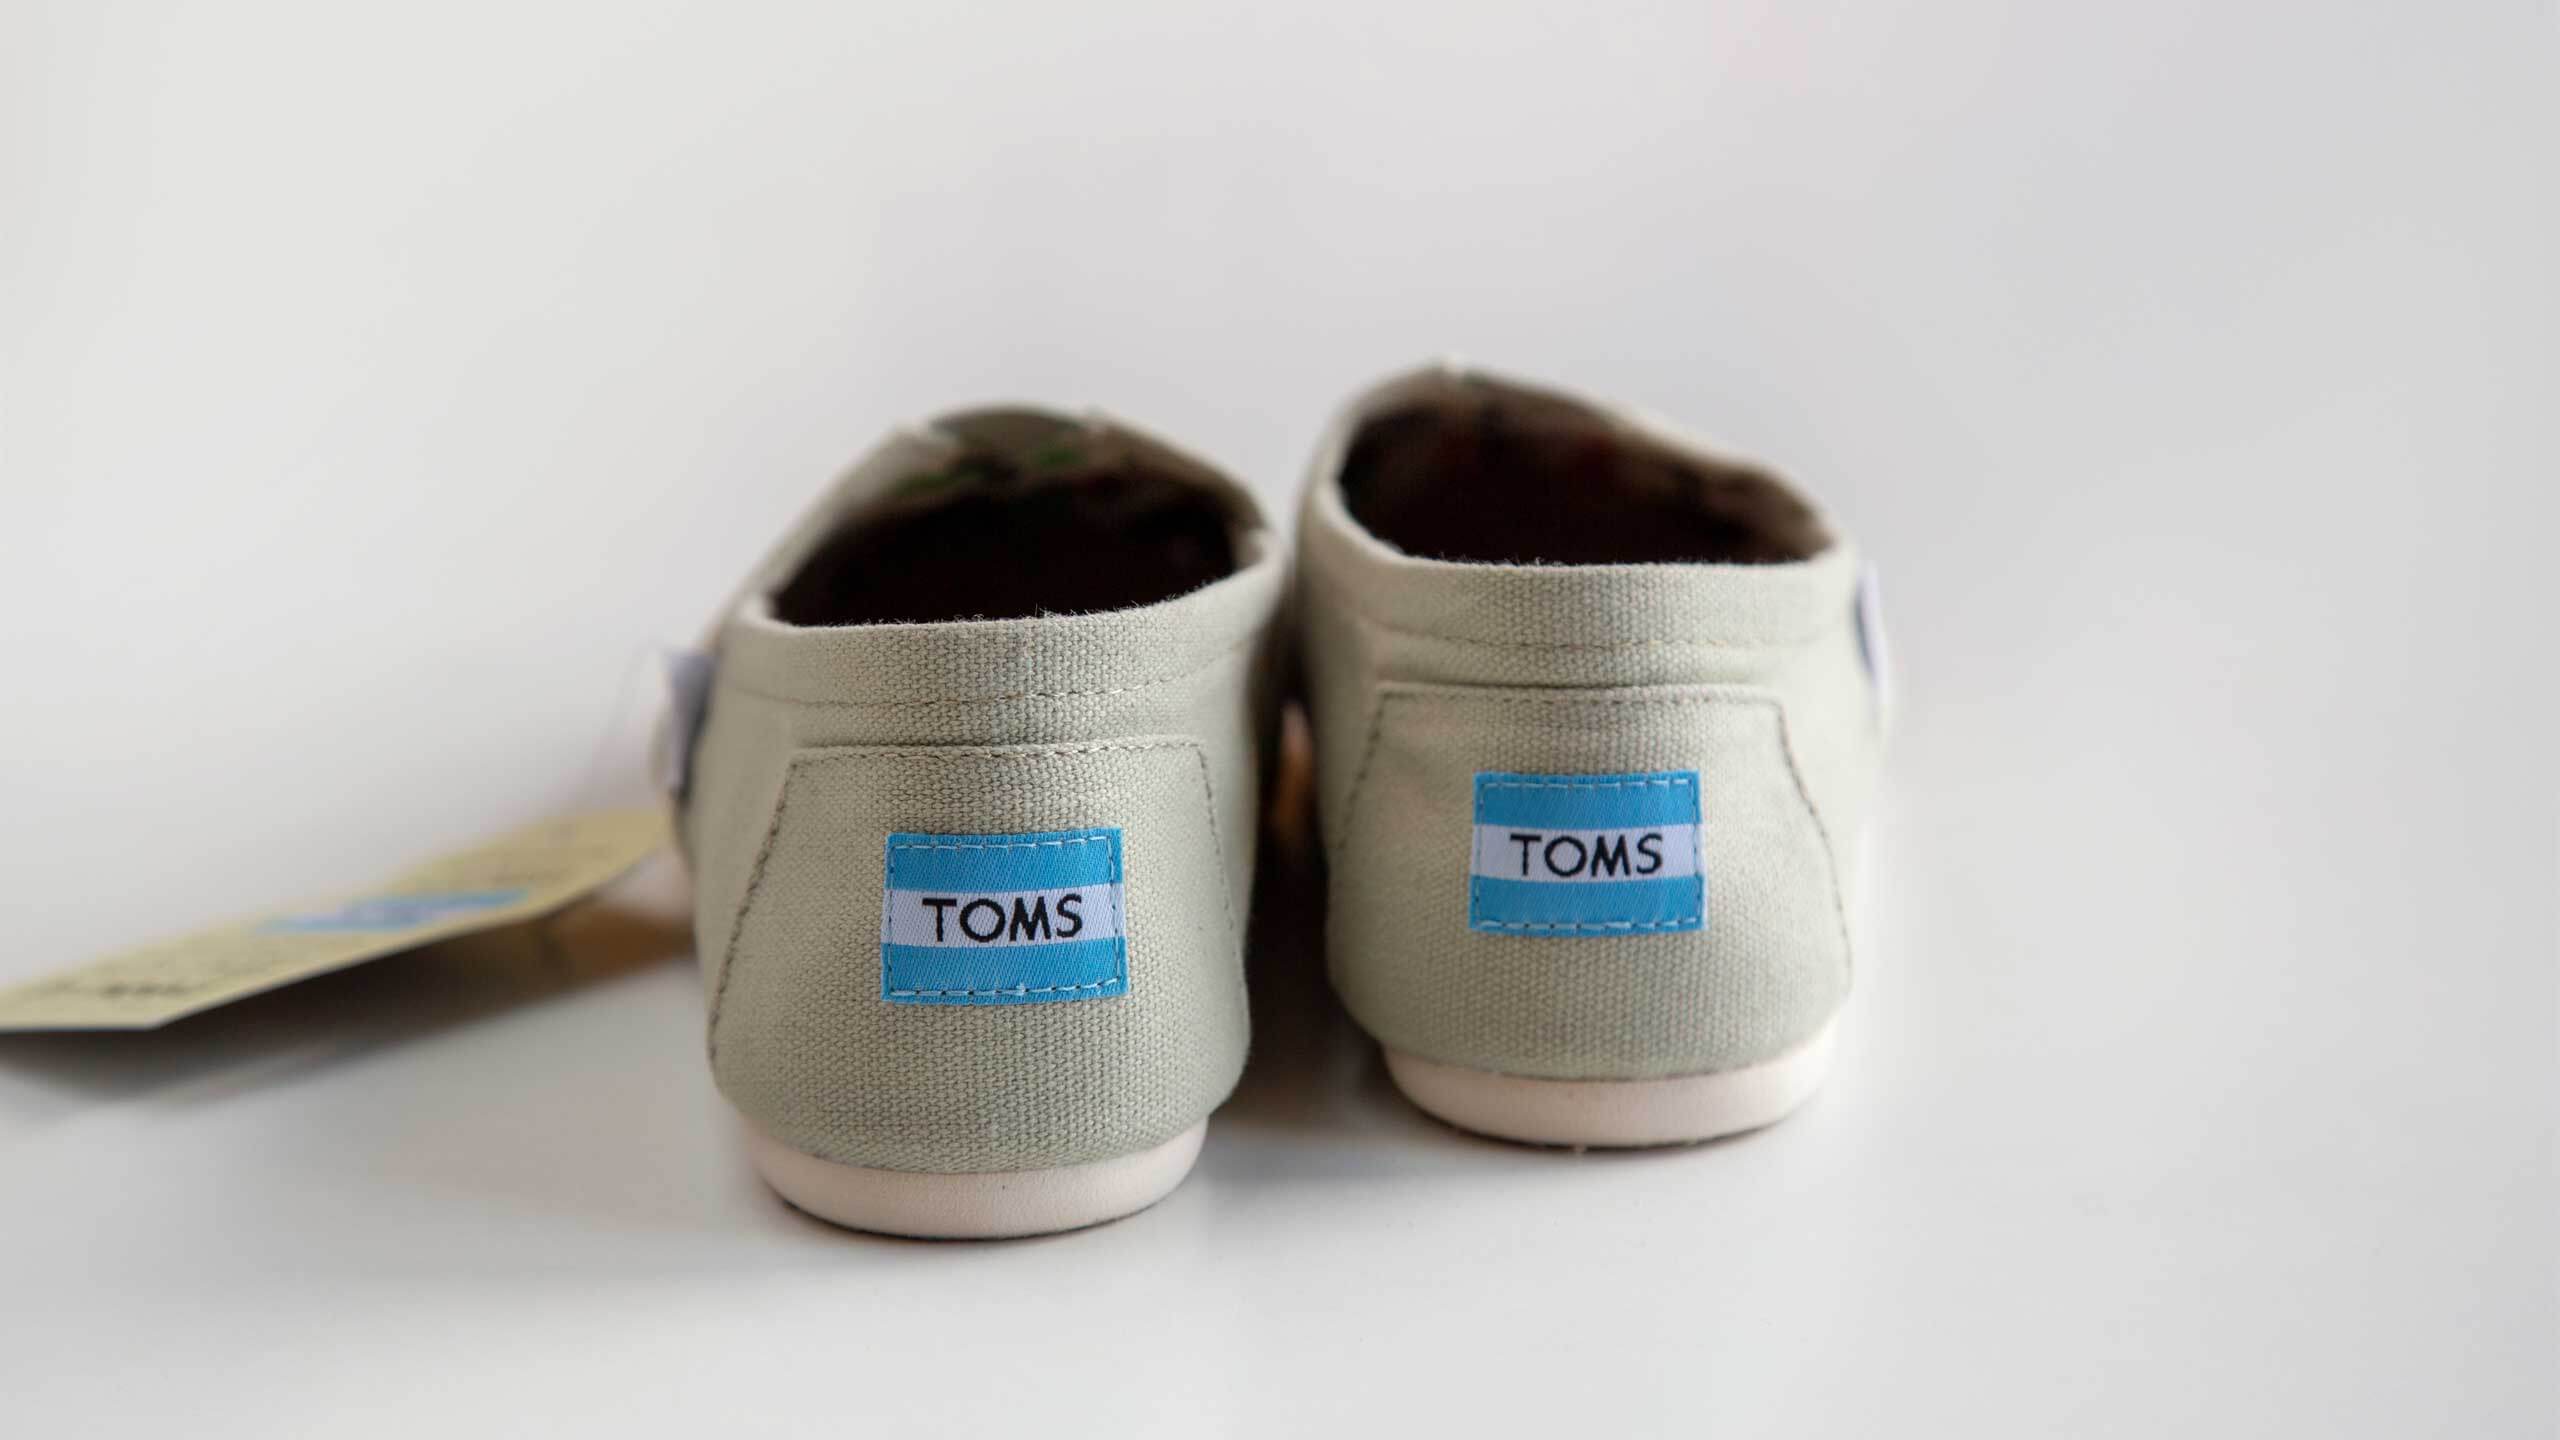 pinion Skur tragt Sustainability Stemming From Your Feet: TOMS Leads the Way - Impakter